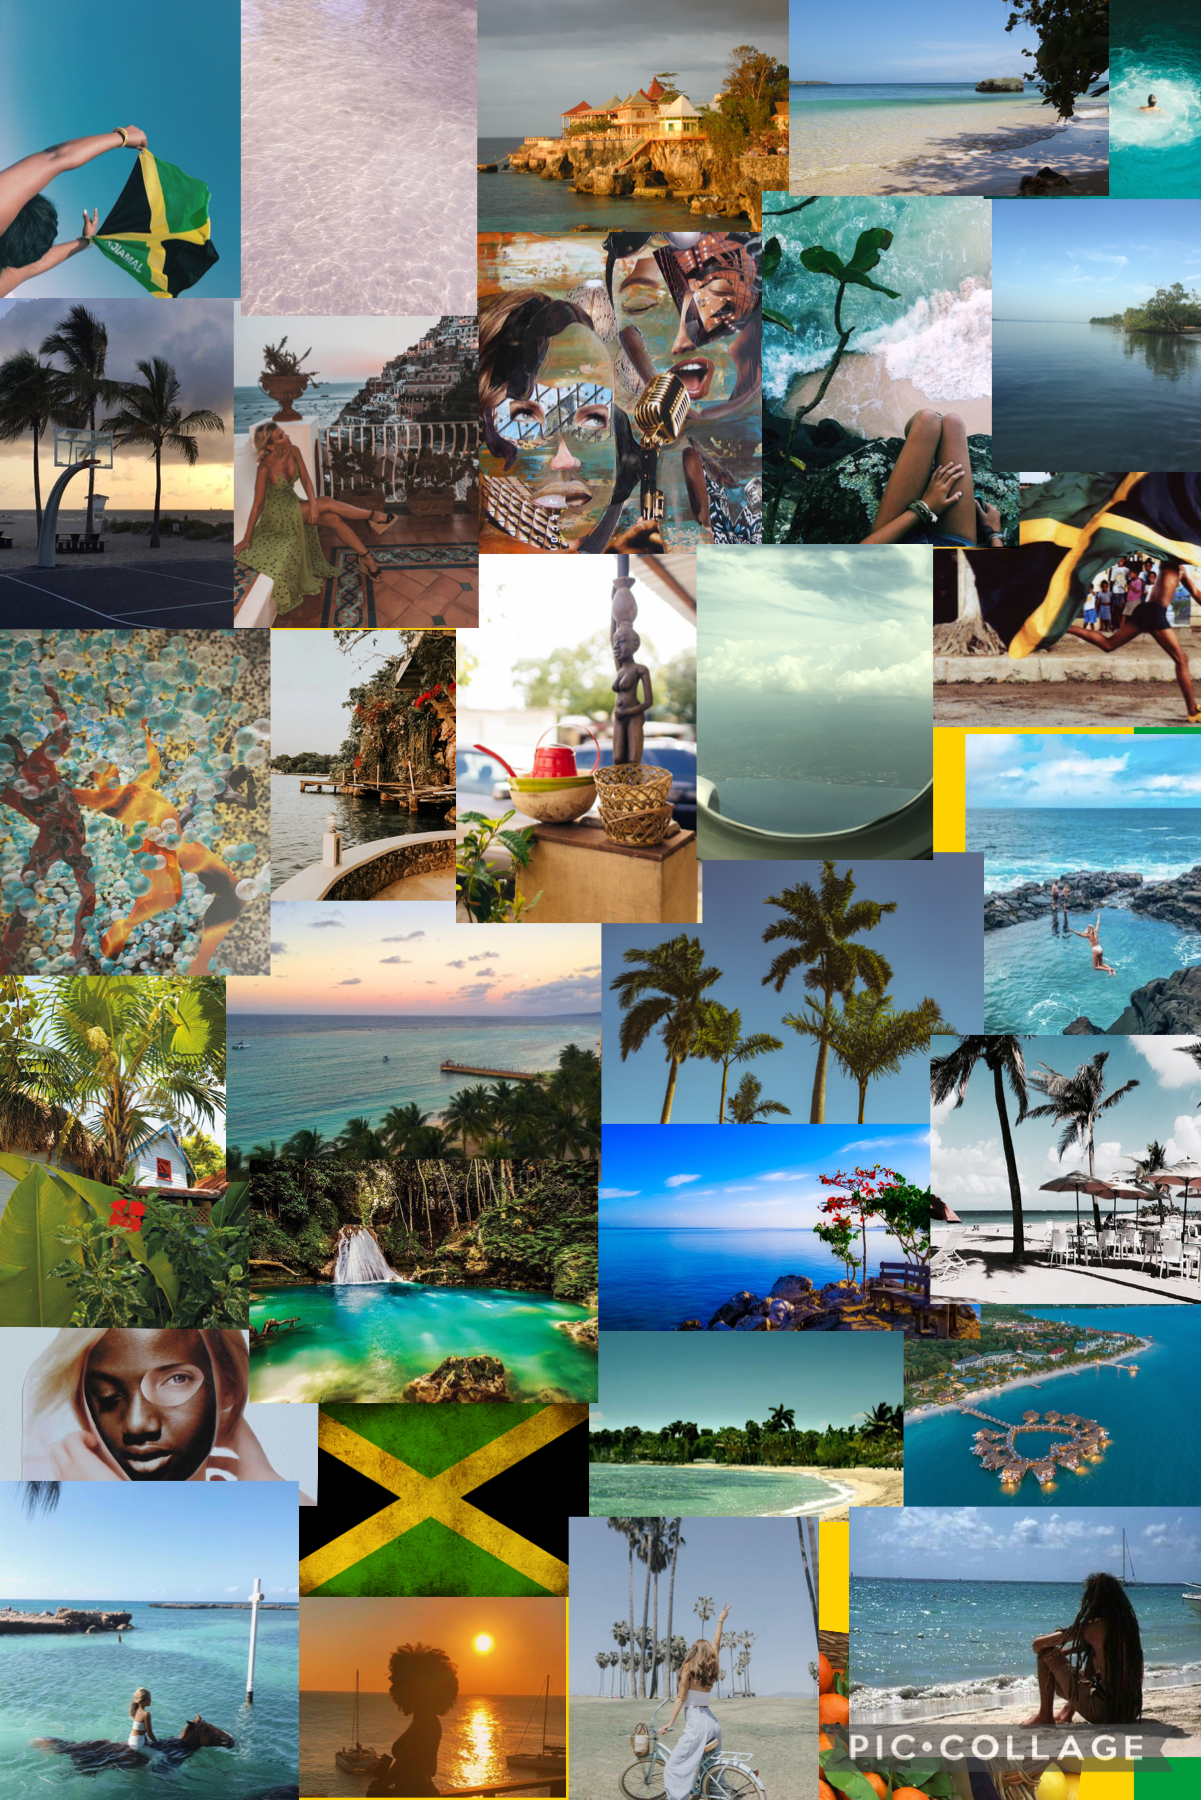 🇯🇲I’m in Jamaica! (tap)🇯🇲 
I’m on vacation in Jamaica and it is such a beautiful place! I based this collage off of it and I wanted to share how amazing this country is. have a great week <3